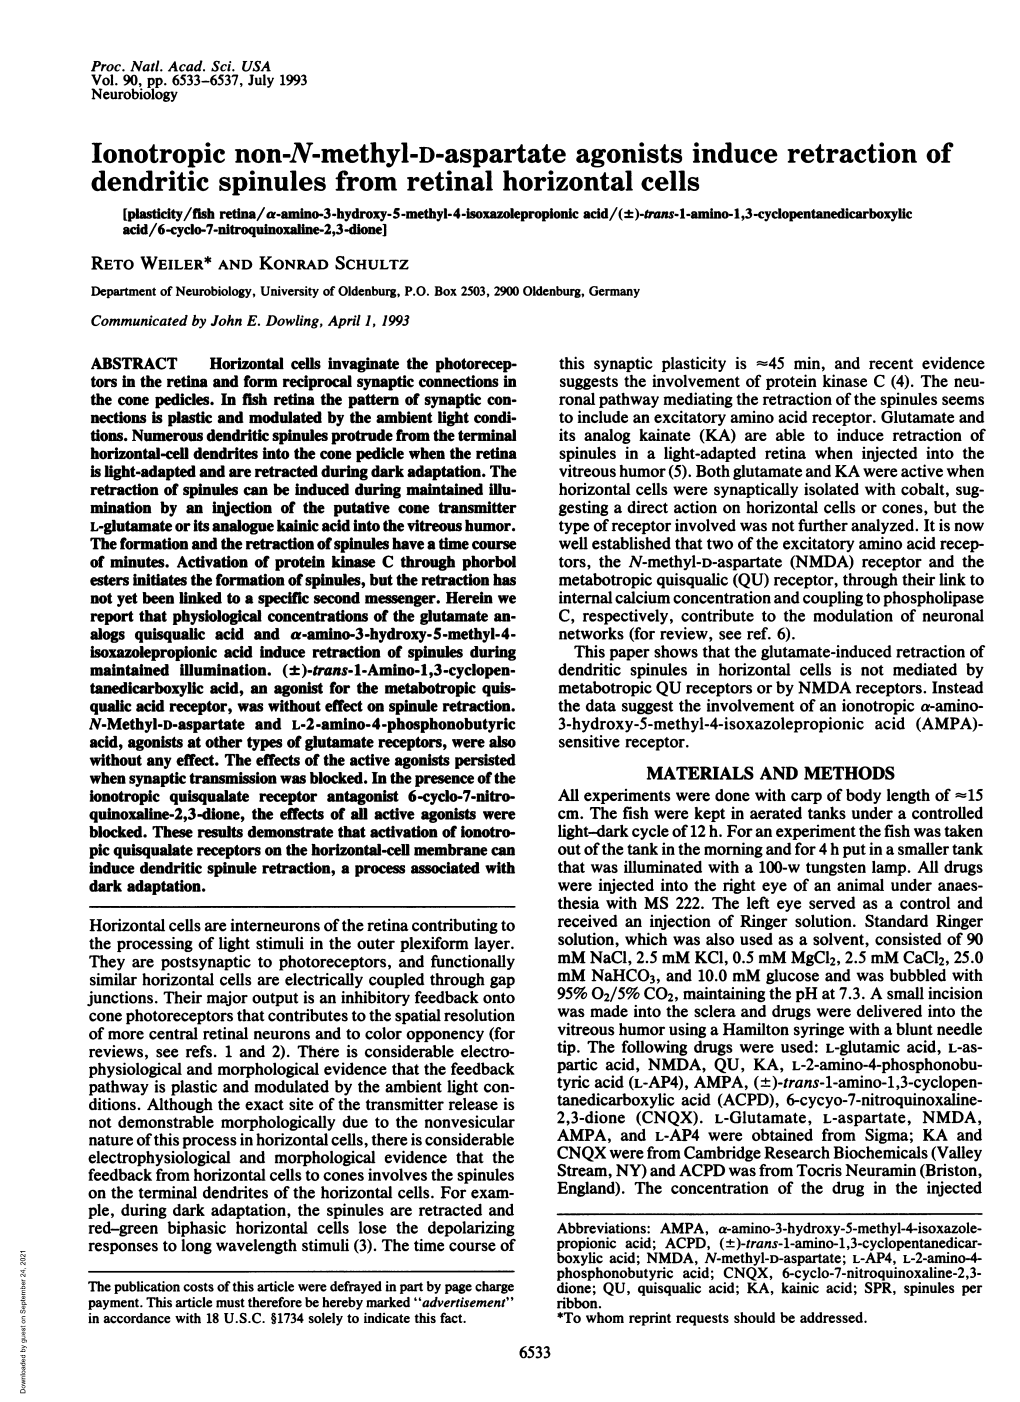 Lonotropic Non-N-Methyl-D-Aspartate Agonists Induce Retraction Of